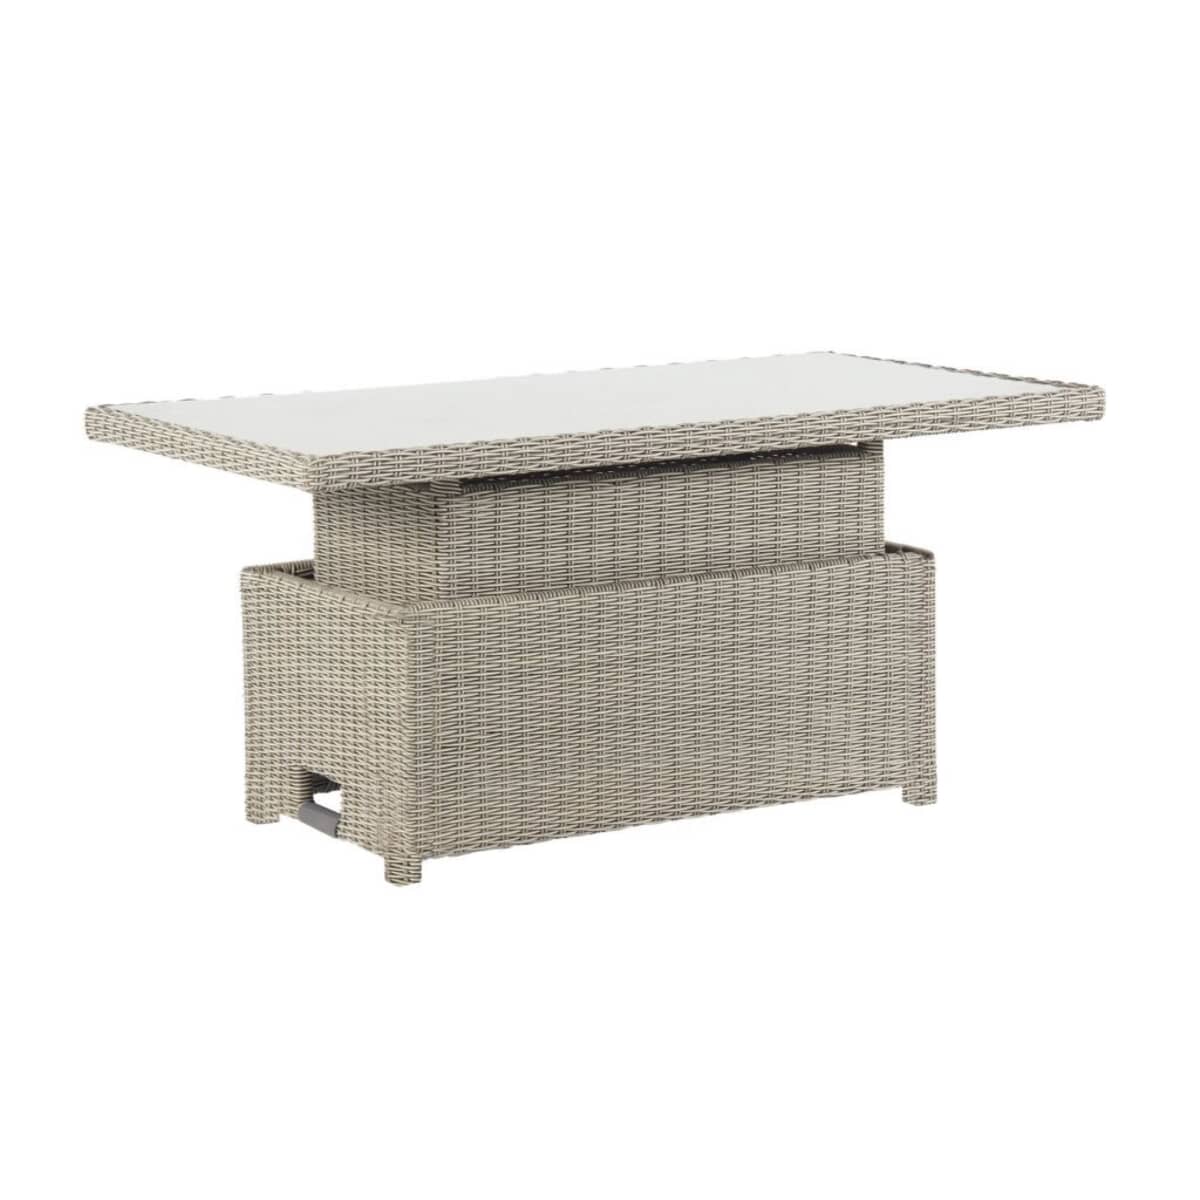 Kettler Palma Signature Glass Top High/Low Table Whitewash